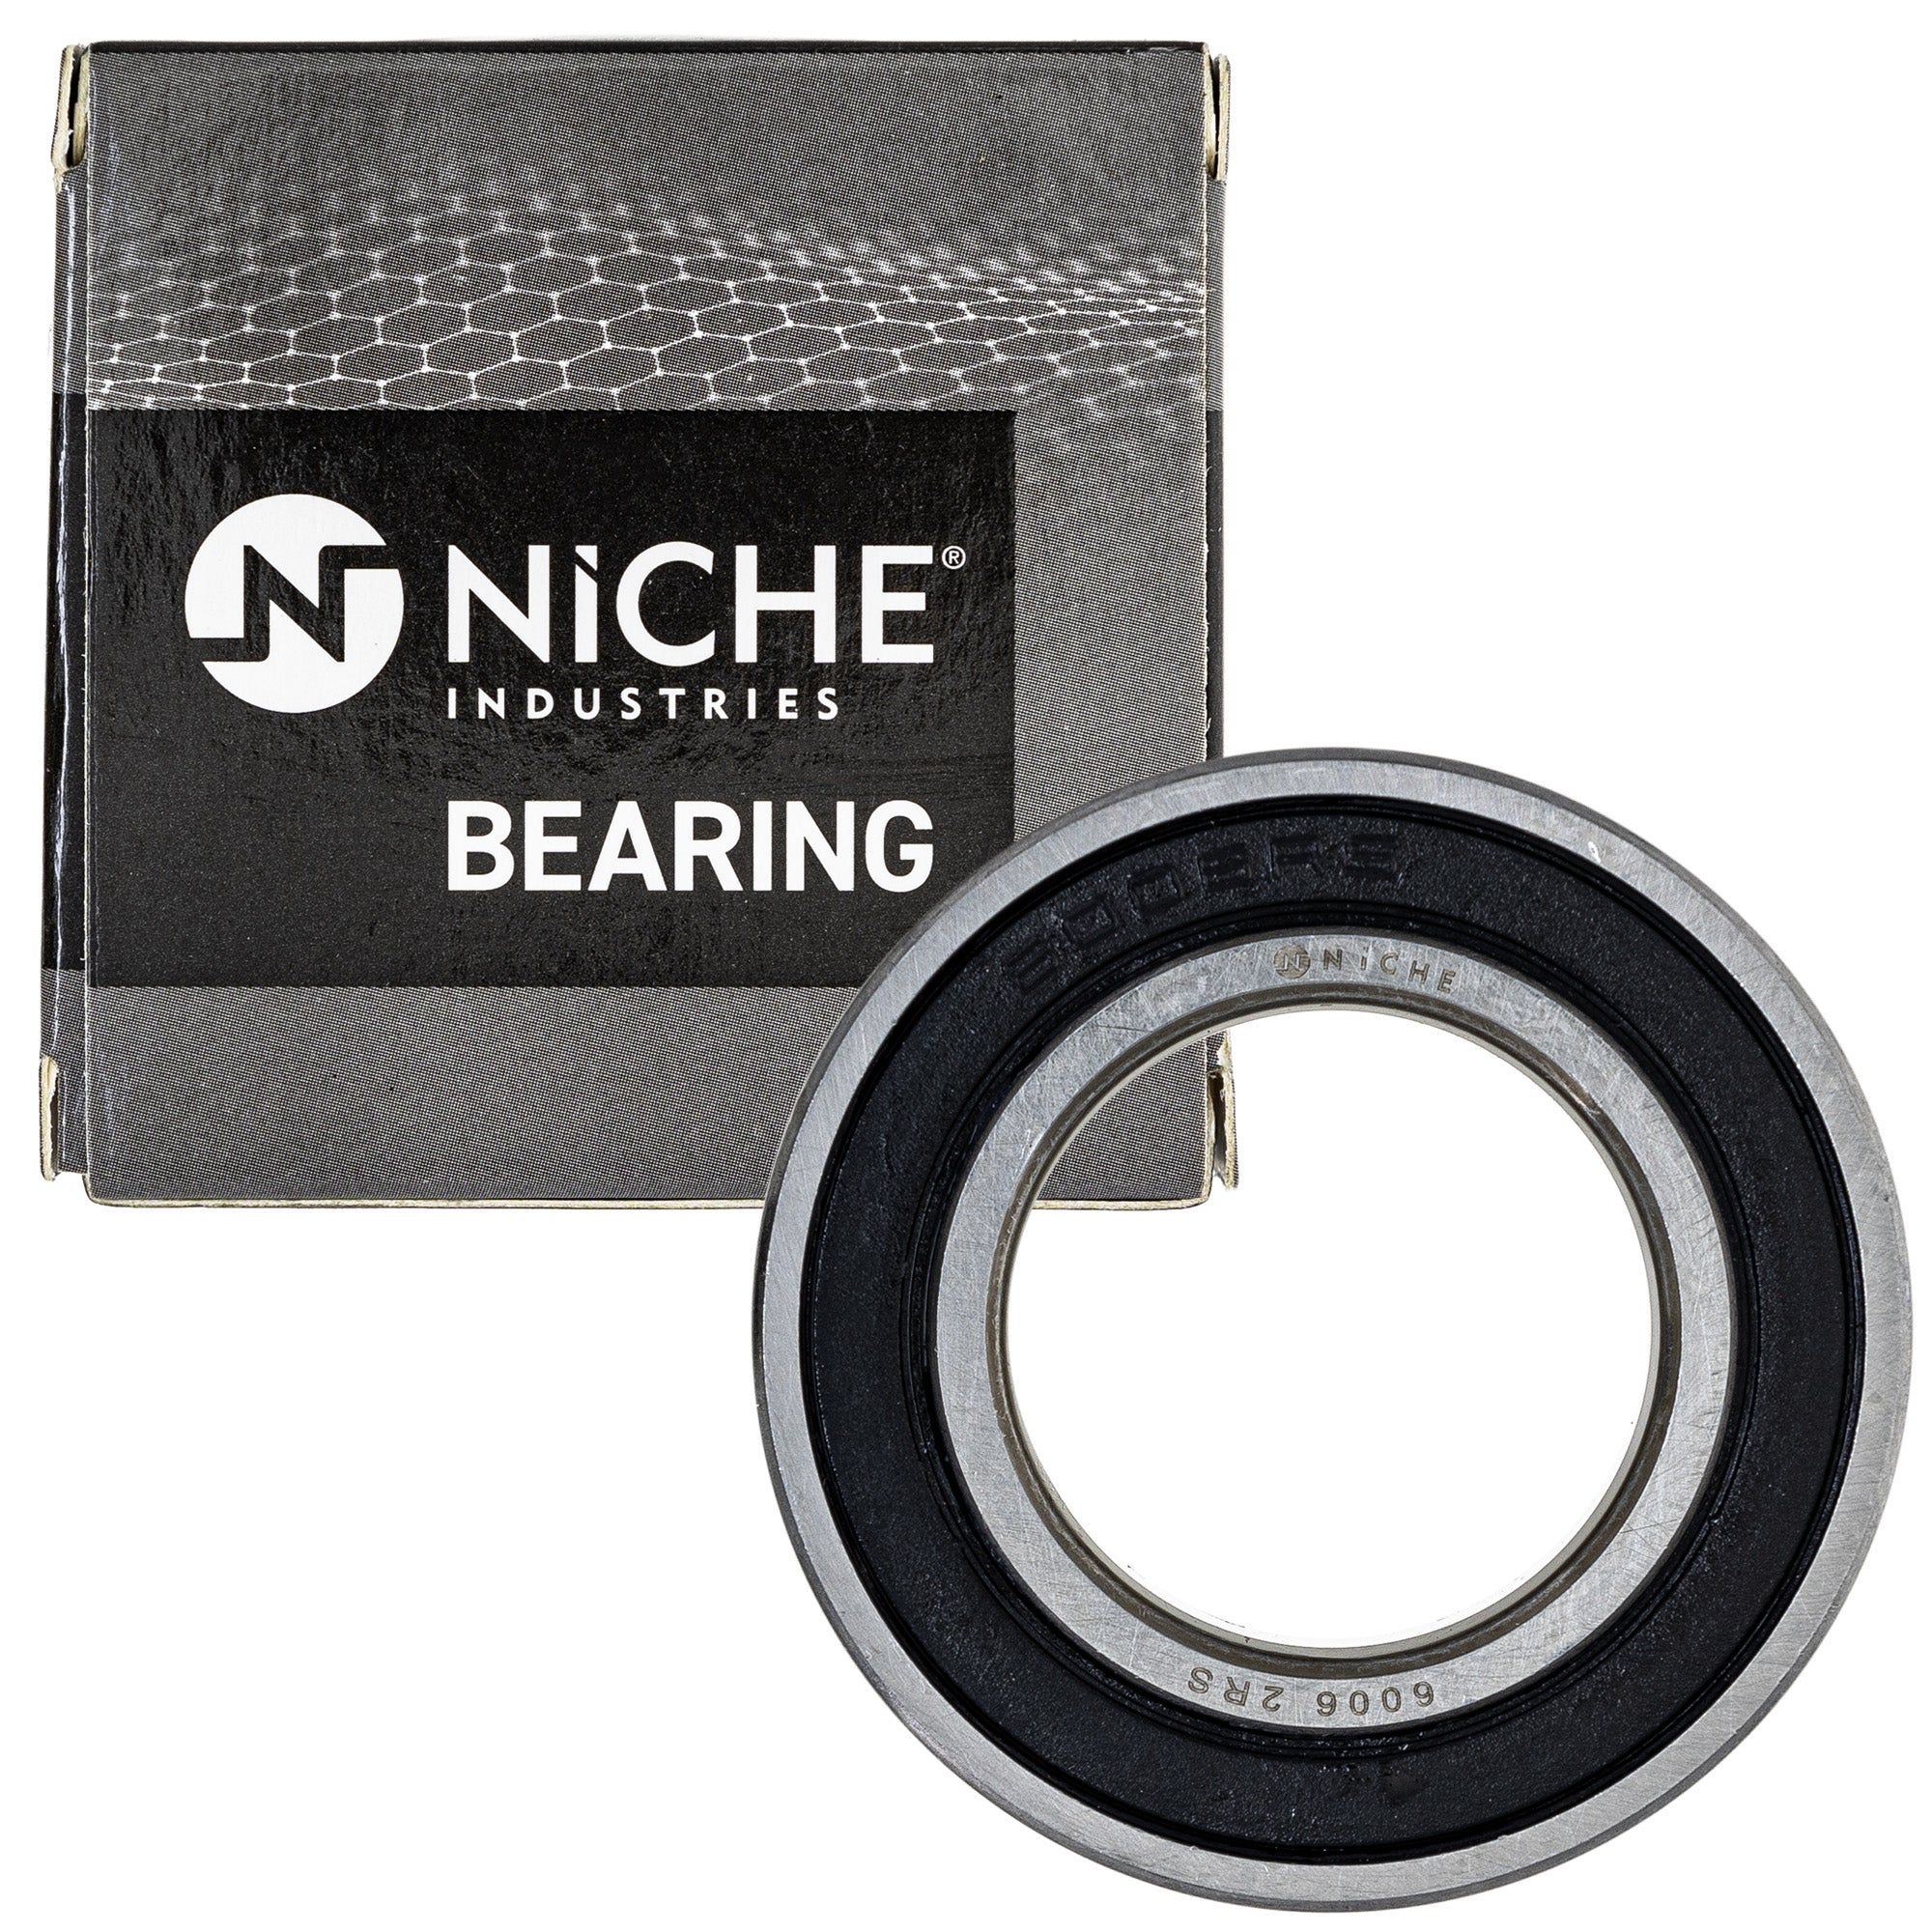 NICHE MK1009167 Wheel Bearing Seal Kit for zOTHER Grizzly